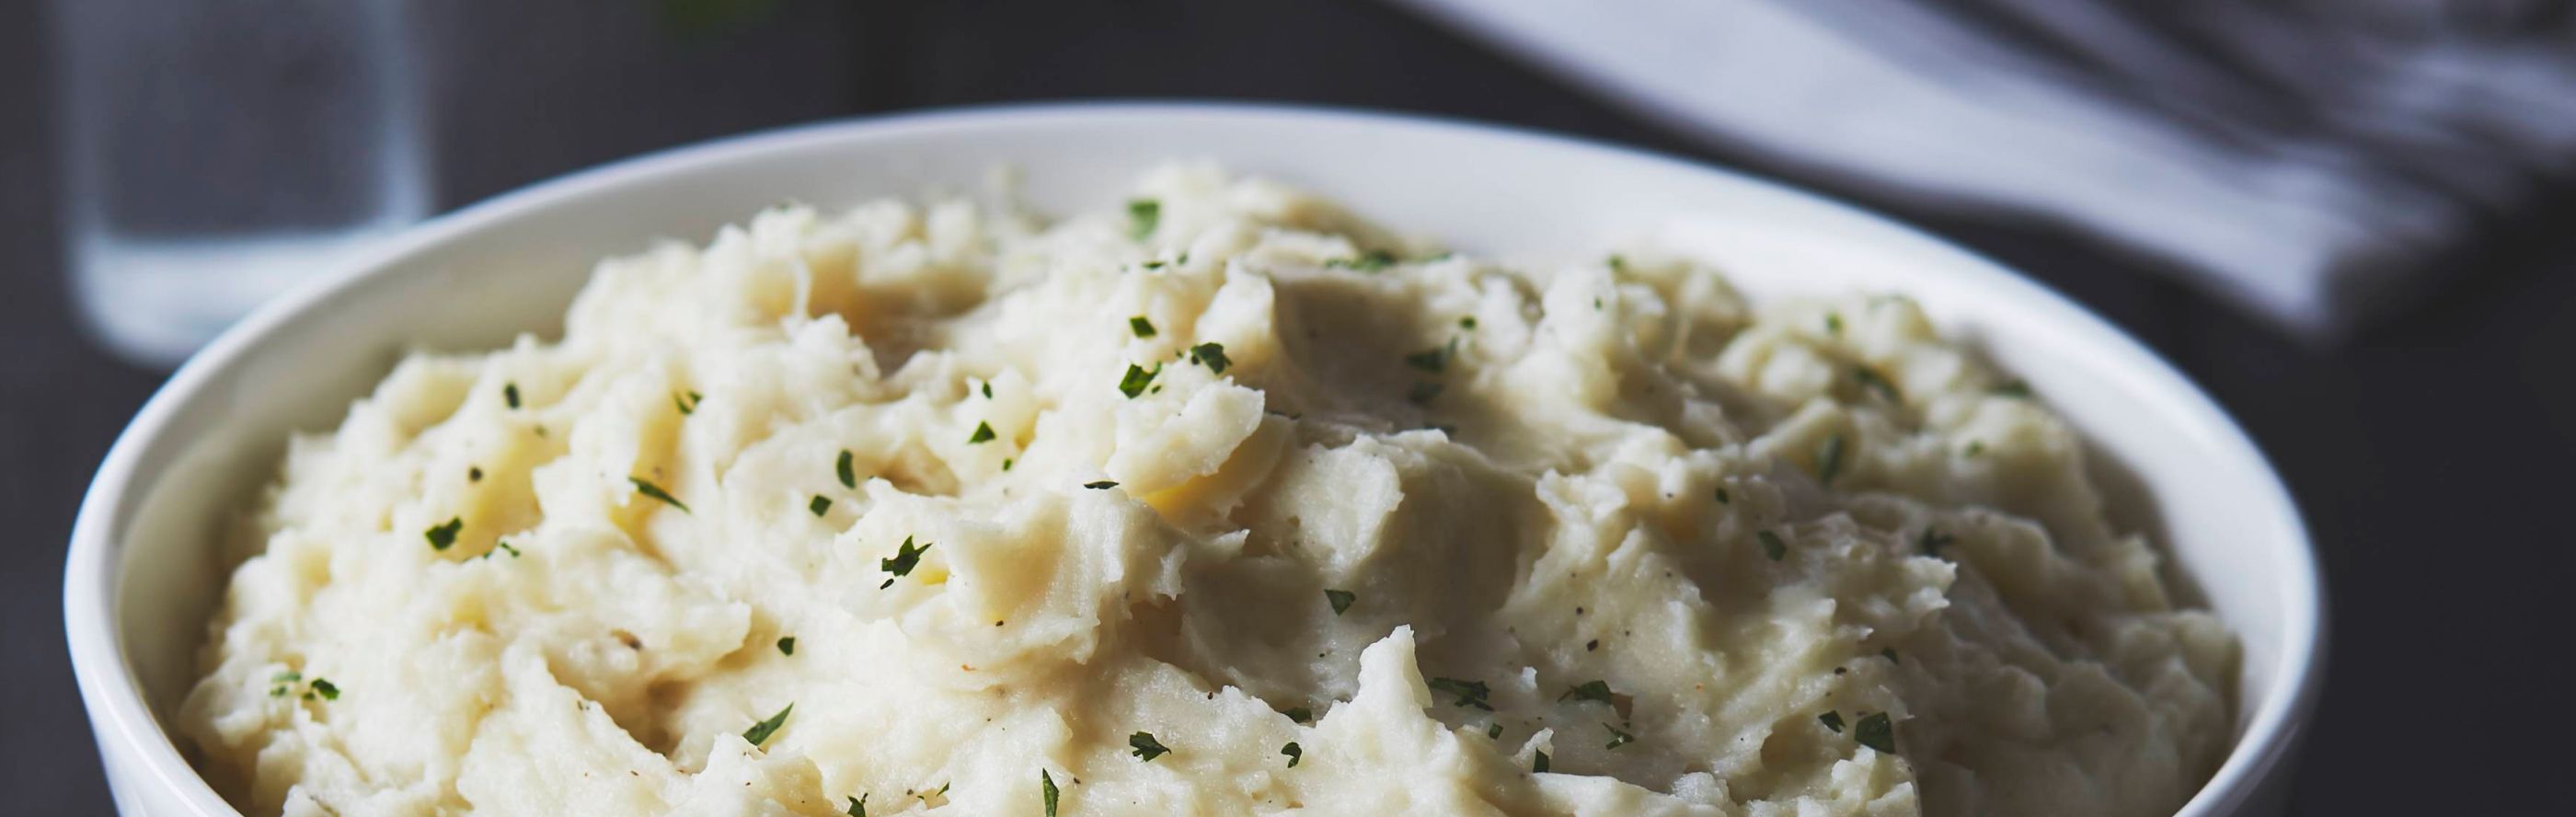 Bowl of mashed potatoes with chives